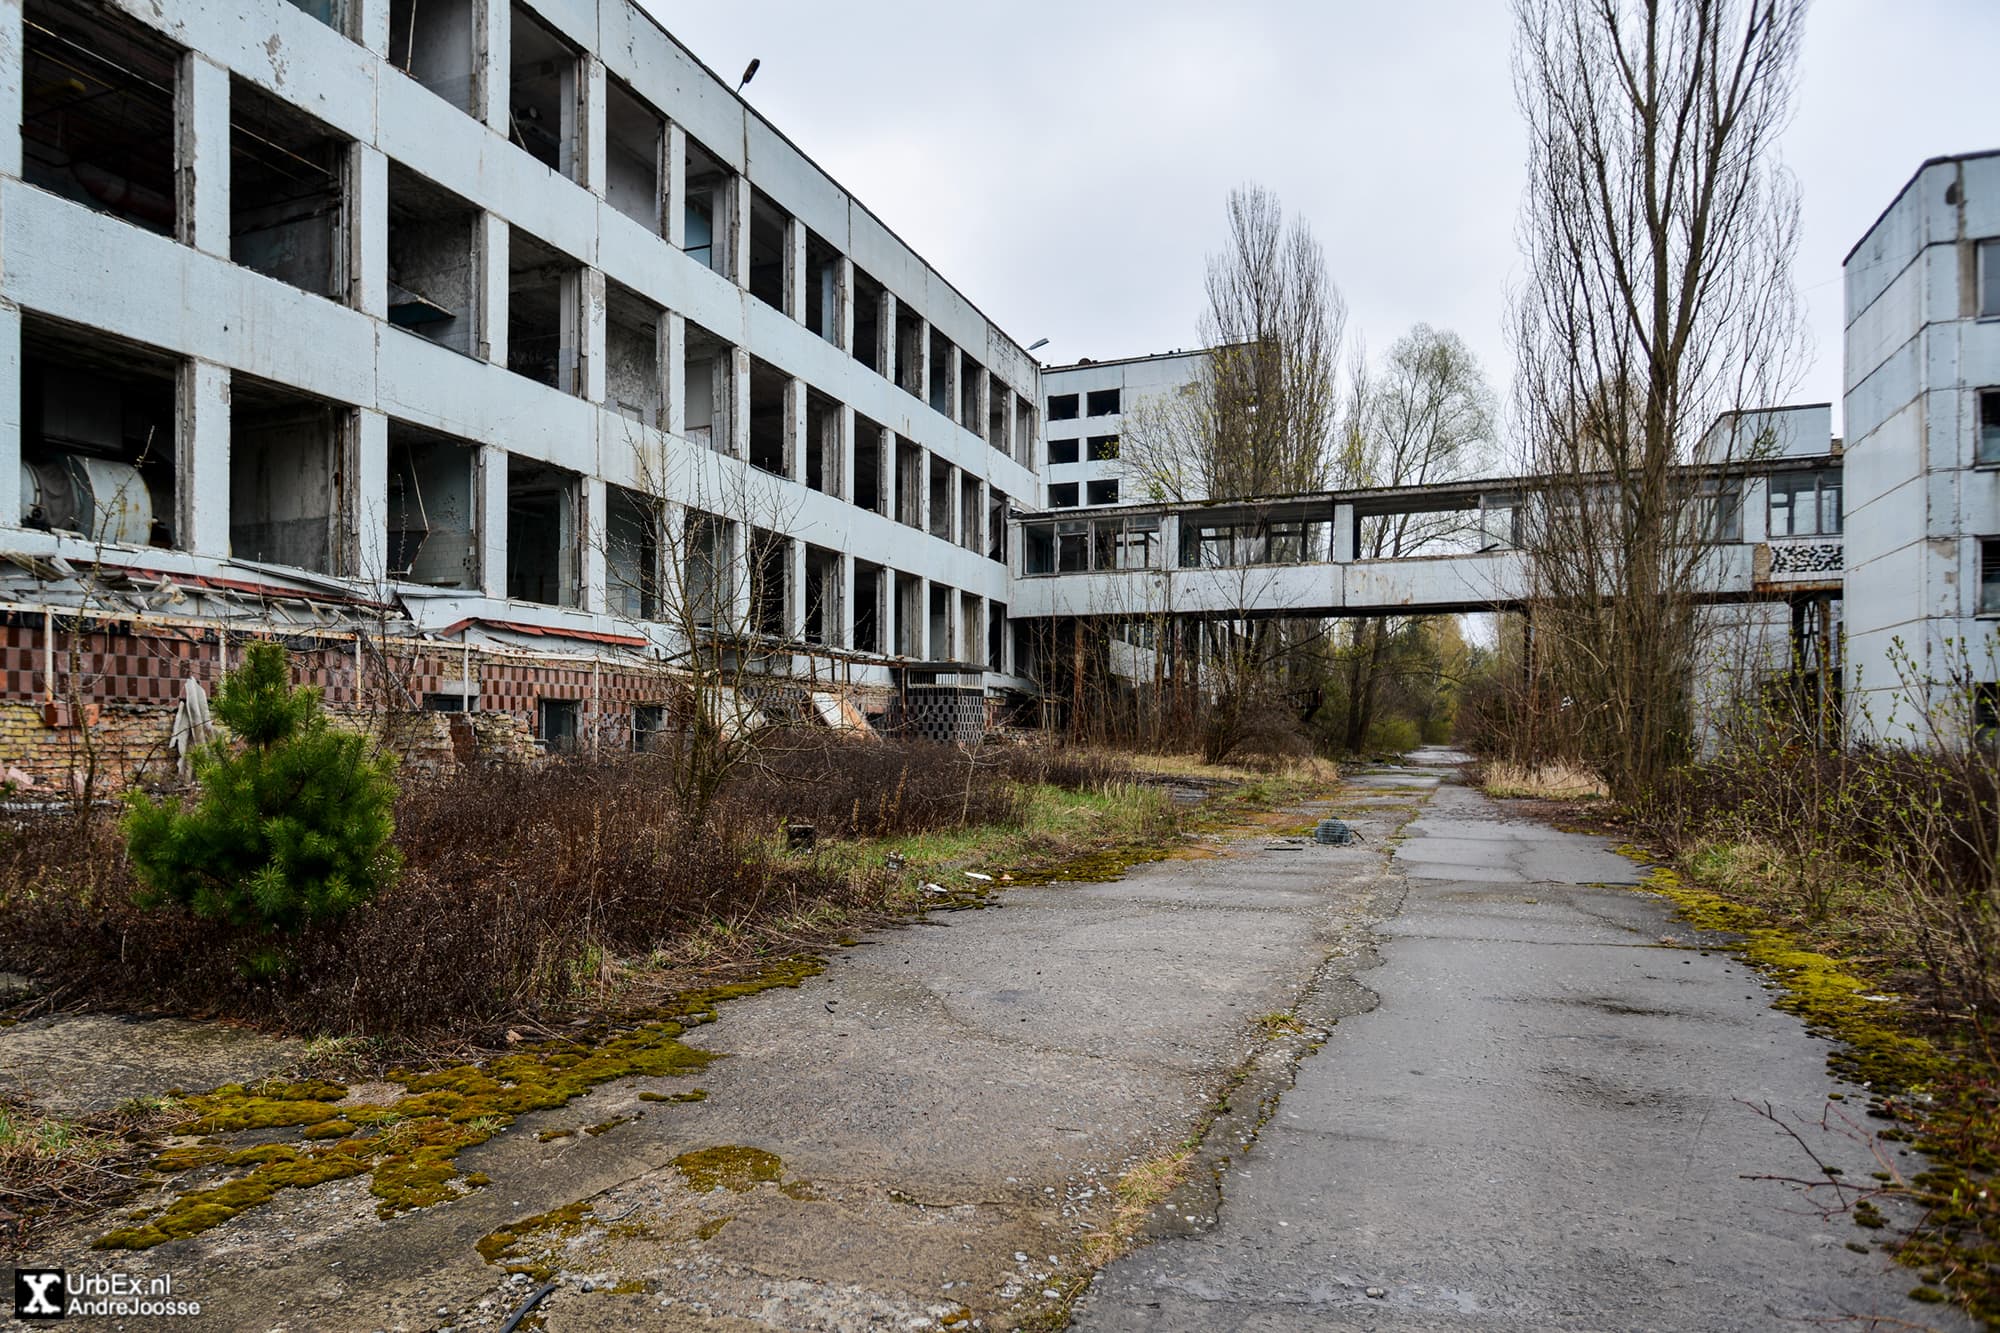 Factory Chernobyl 35 years later